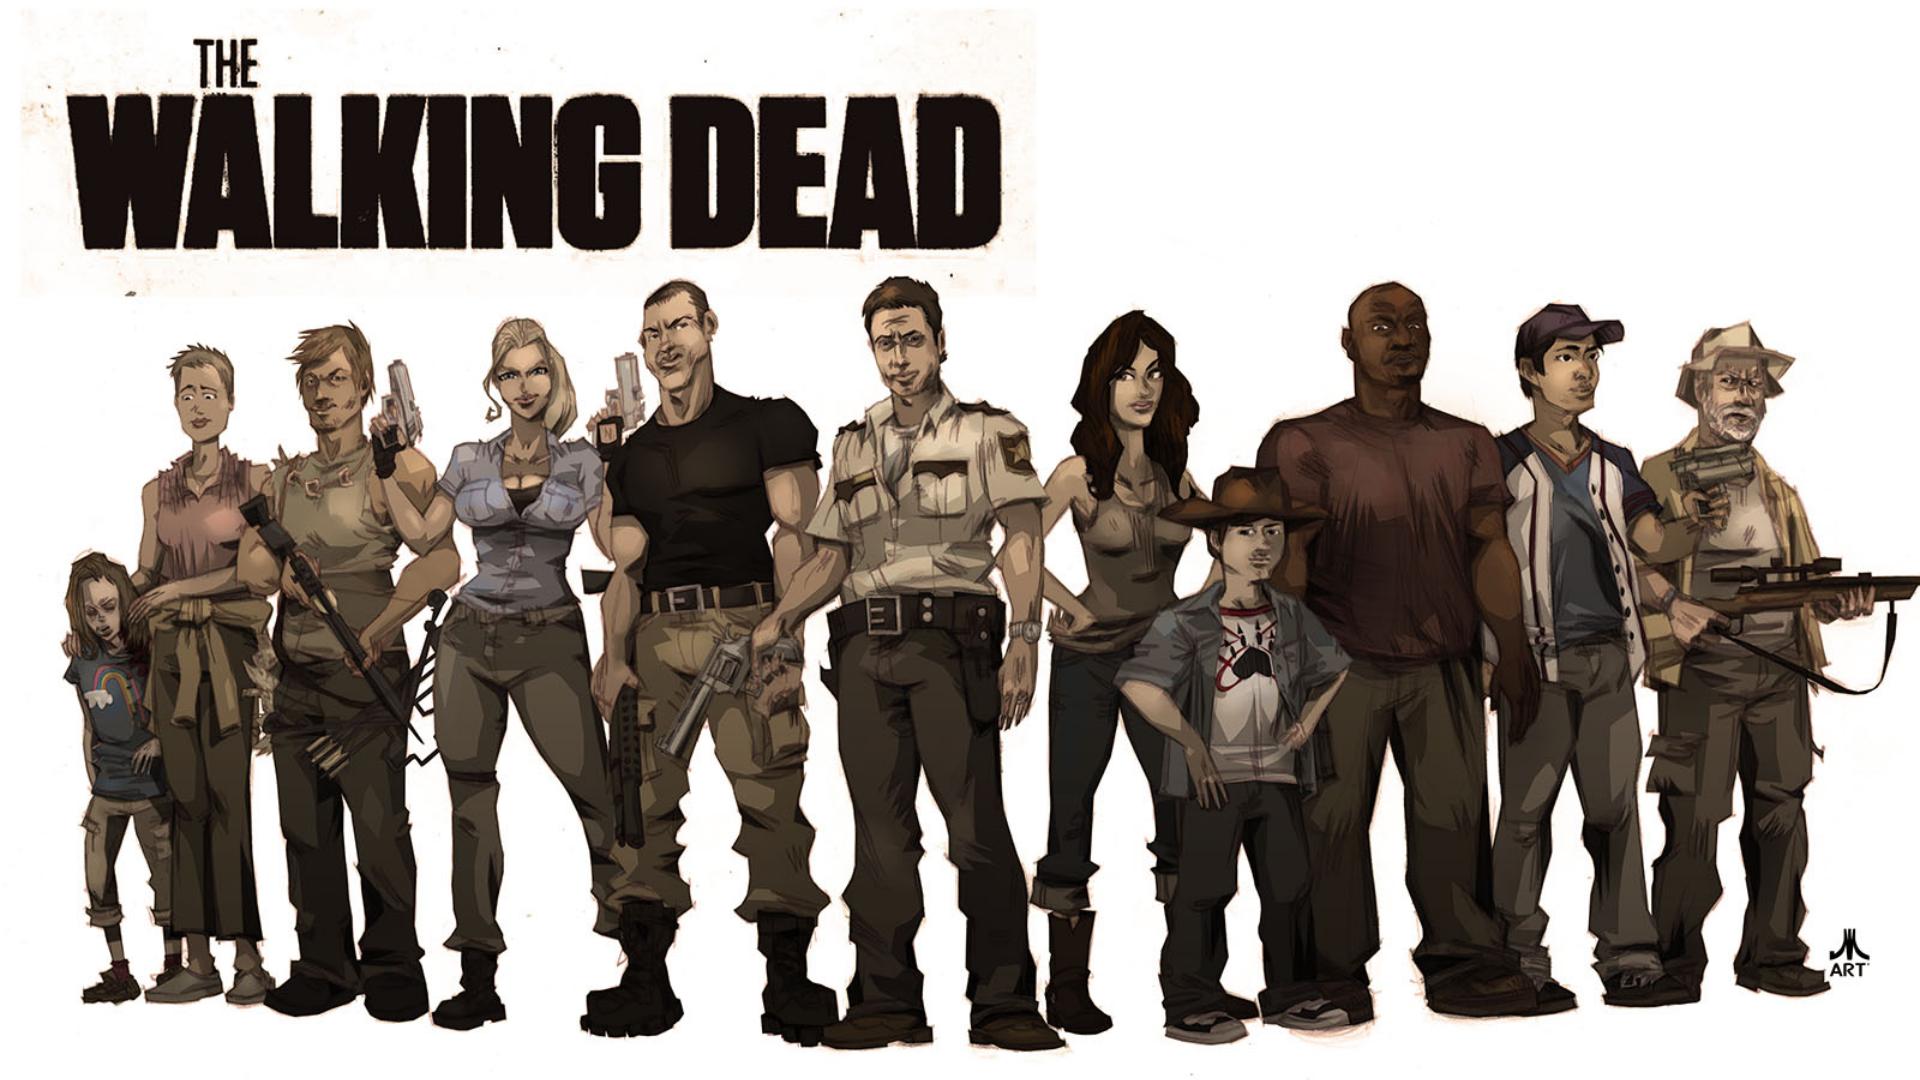 The Walking Dead   Wallpaper High Definition High Quality 1920x1080